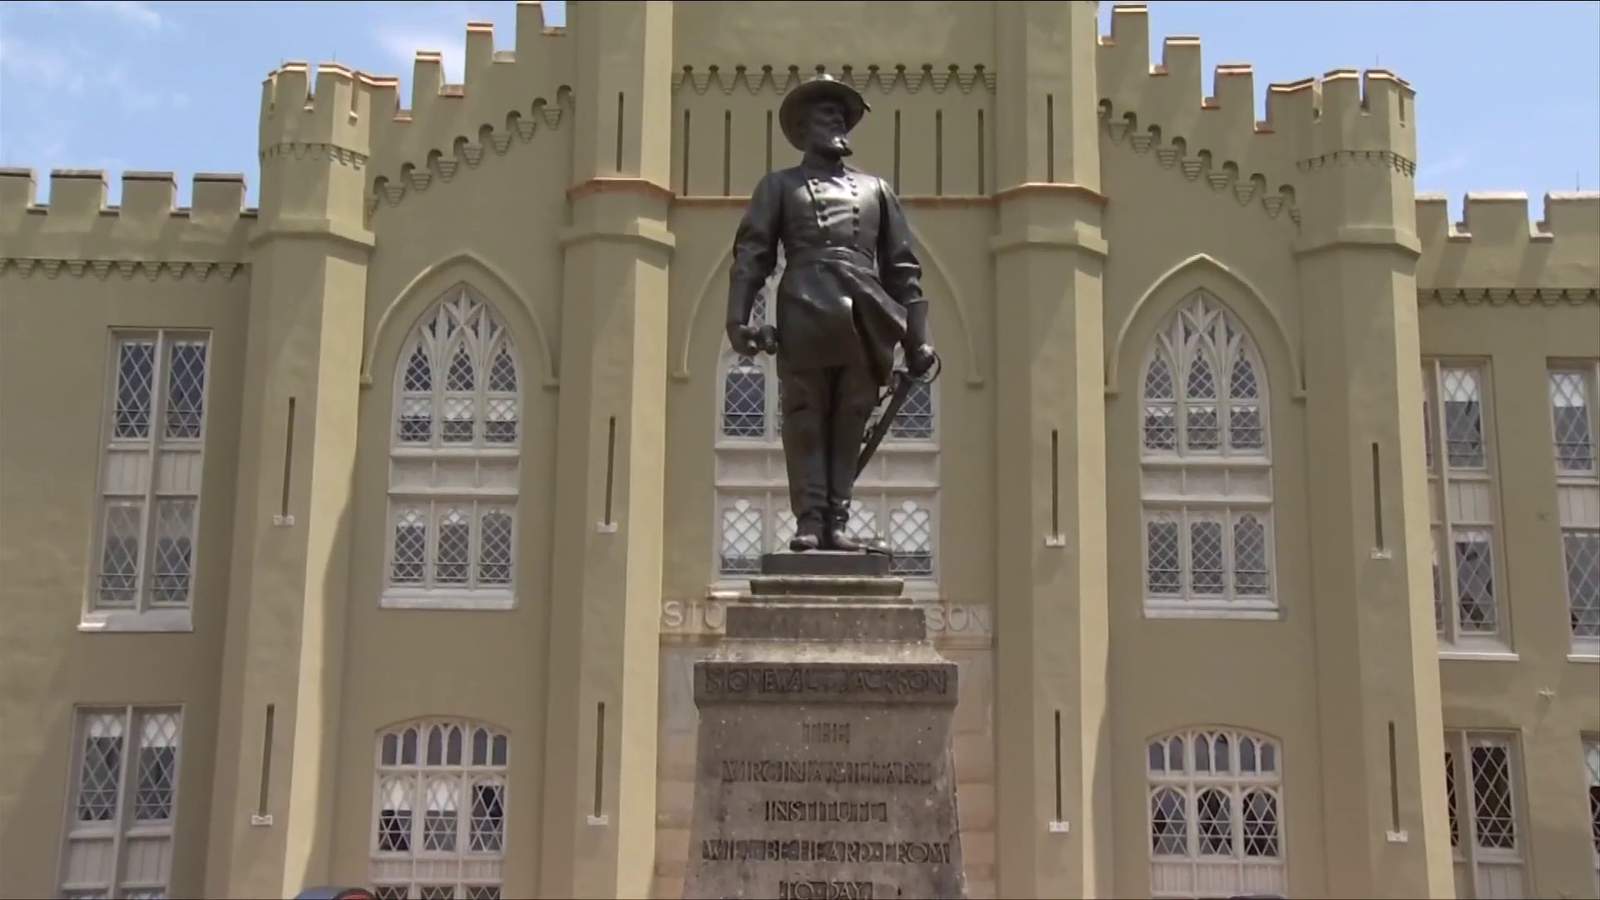 We cant undo our history': VMI to address racism, inequality without removing Confederate monuments